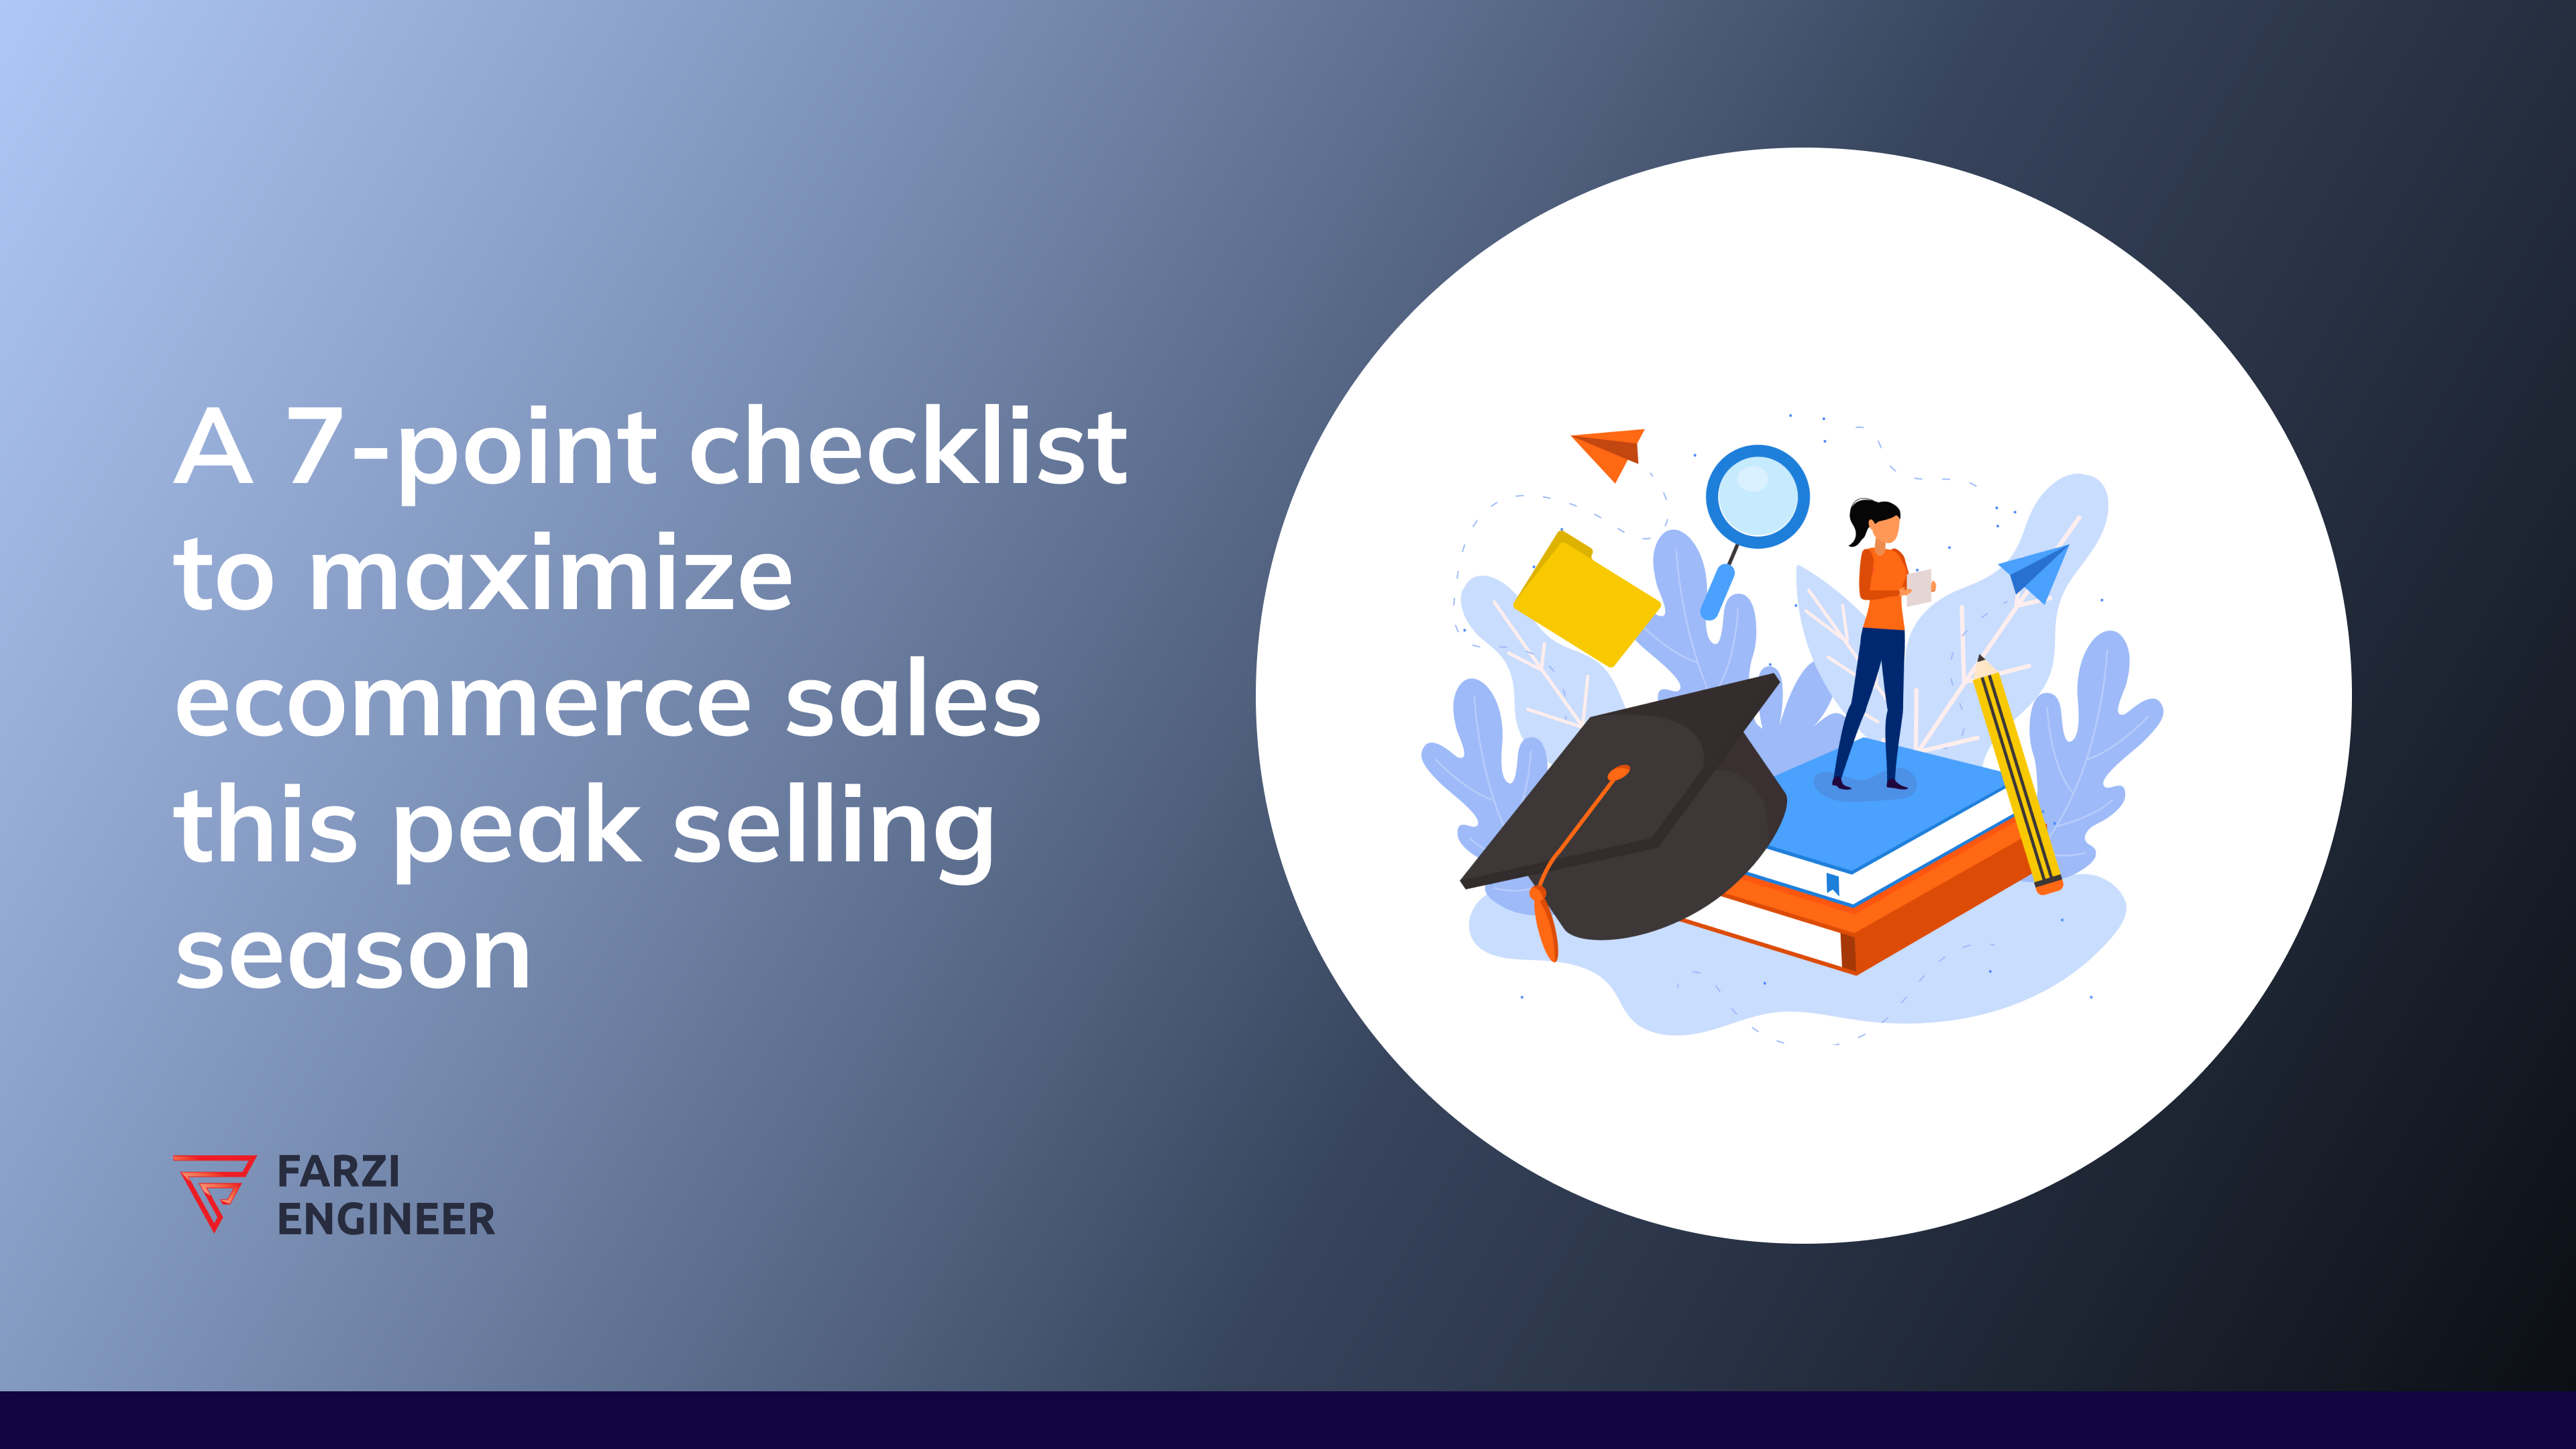 You are currently viewing A 7-point checklist to maximize ecommerce sales this peak selling season